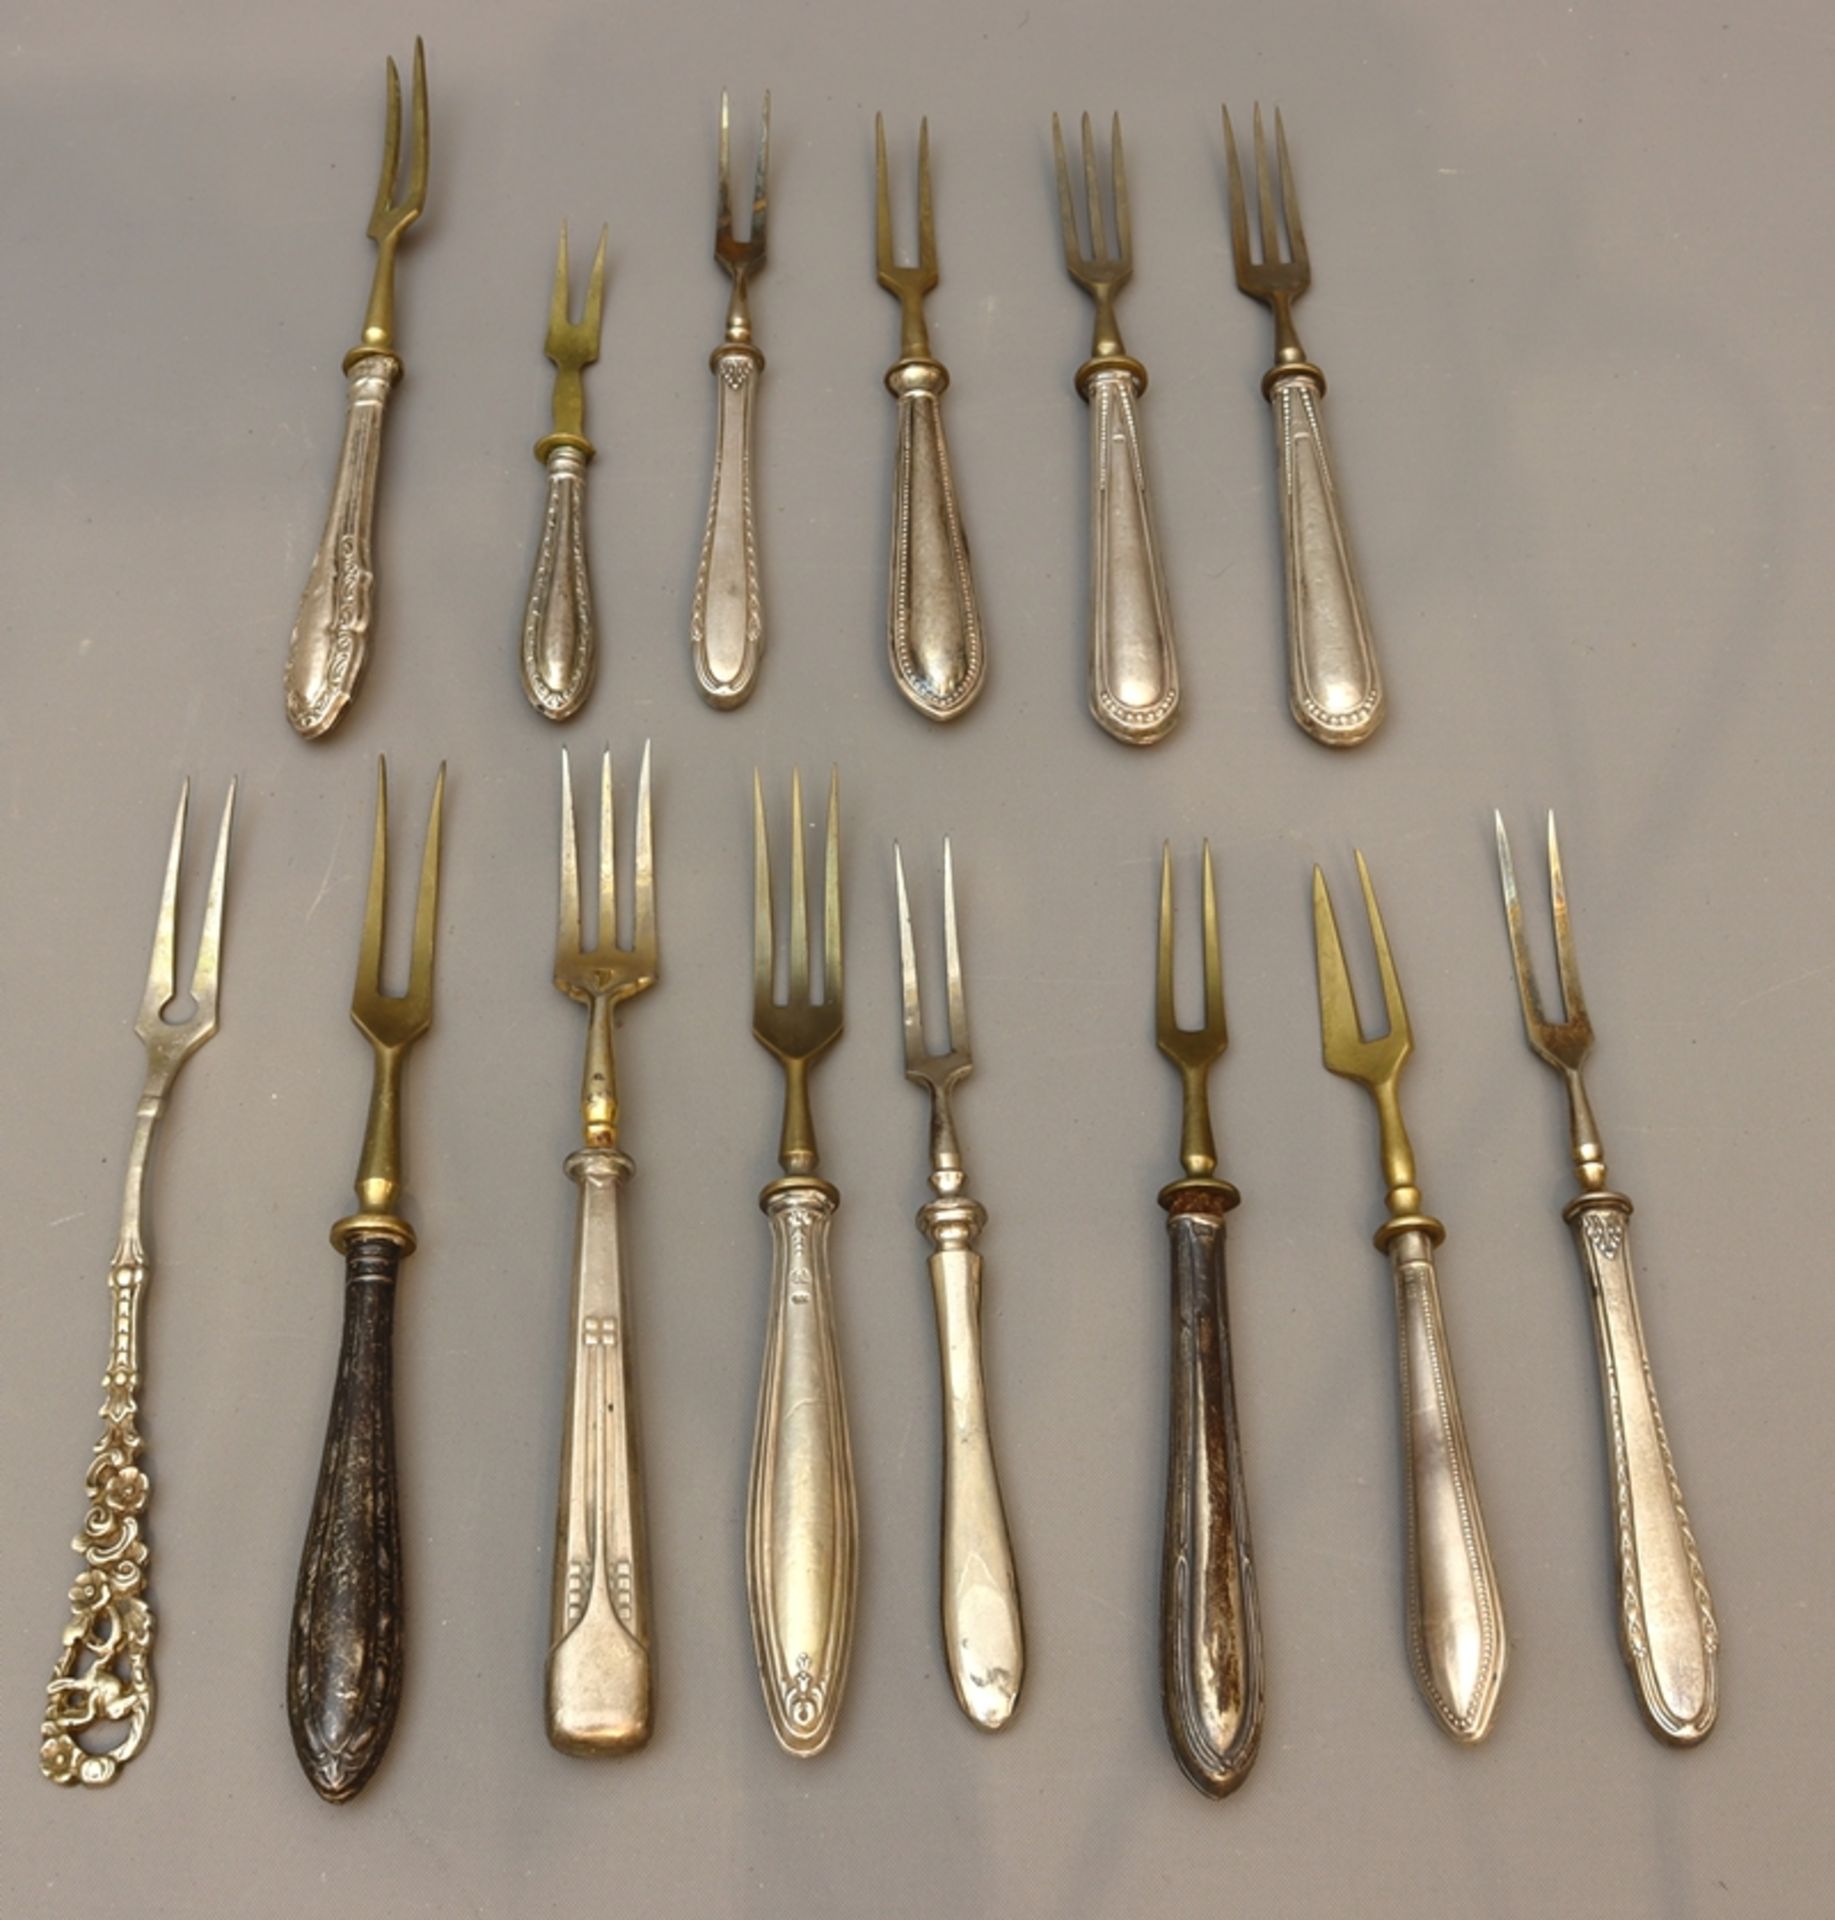 Lot of 14 serving forks of different types, early to mid 20th century, German